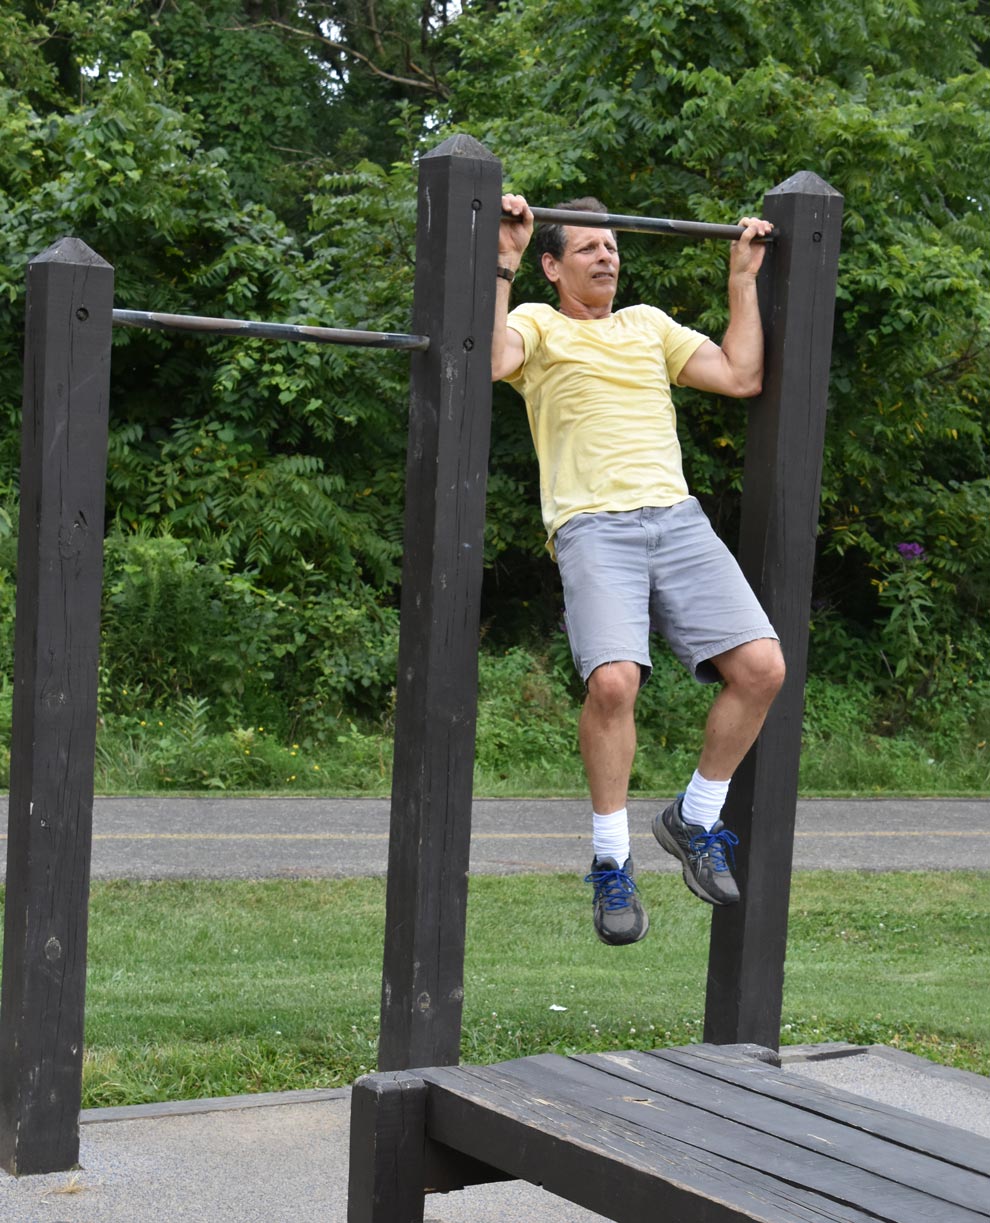 A man uses the pull-up bars at Sharon Woods' fitness station.